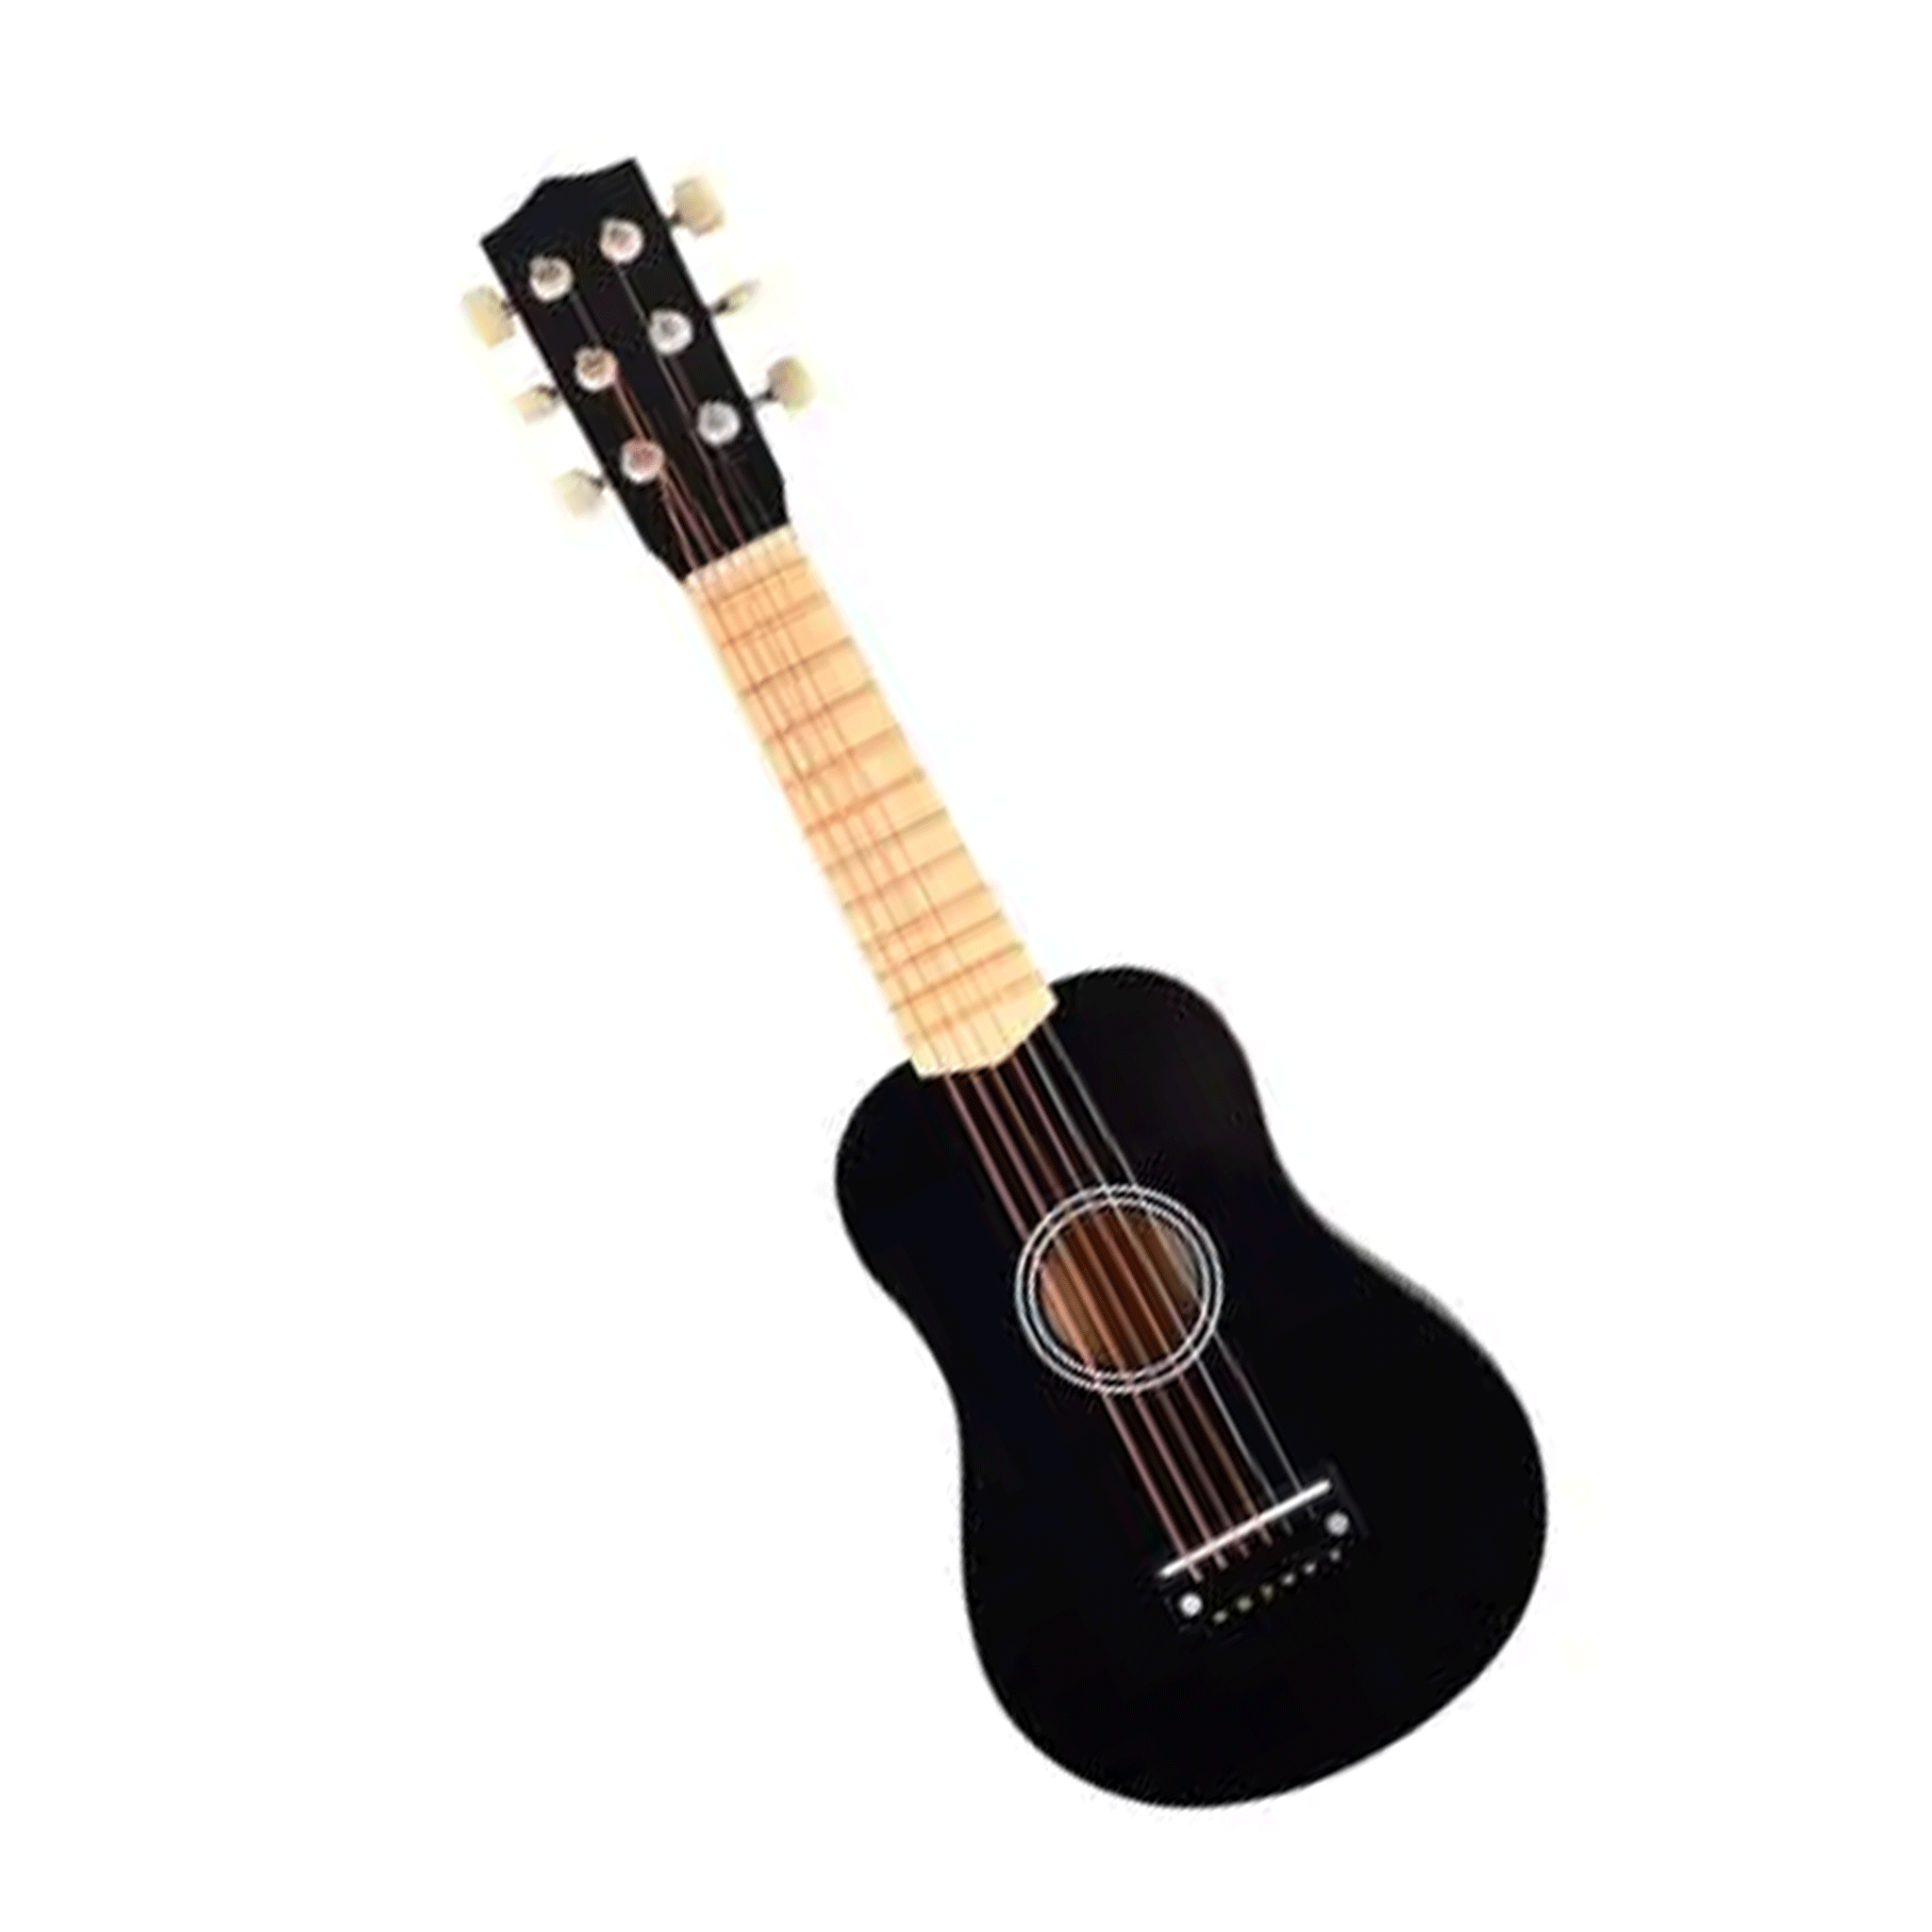 On a white background is a black toy guitar with six strings. 